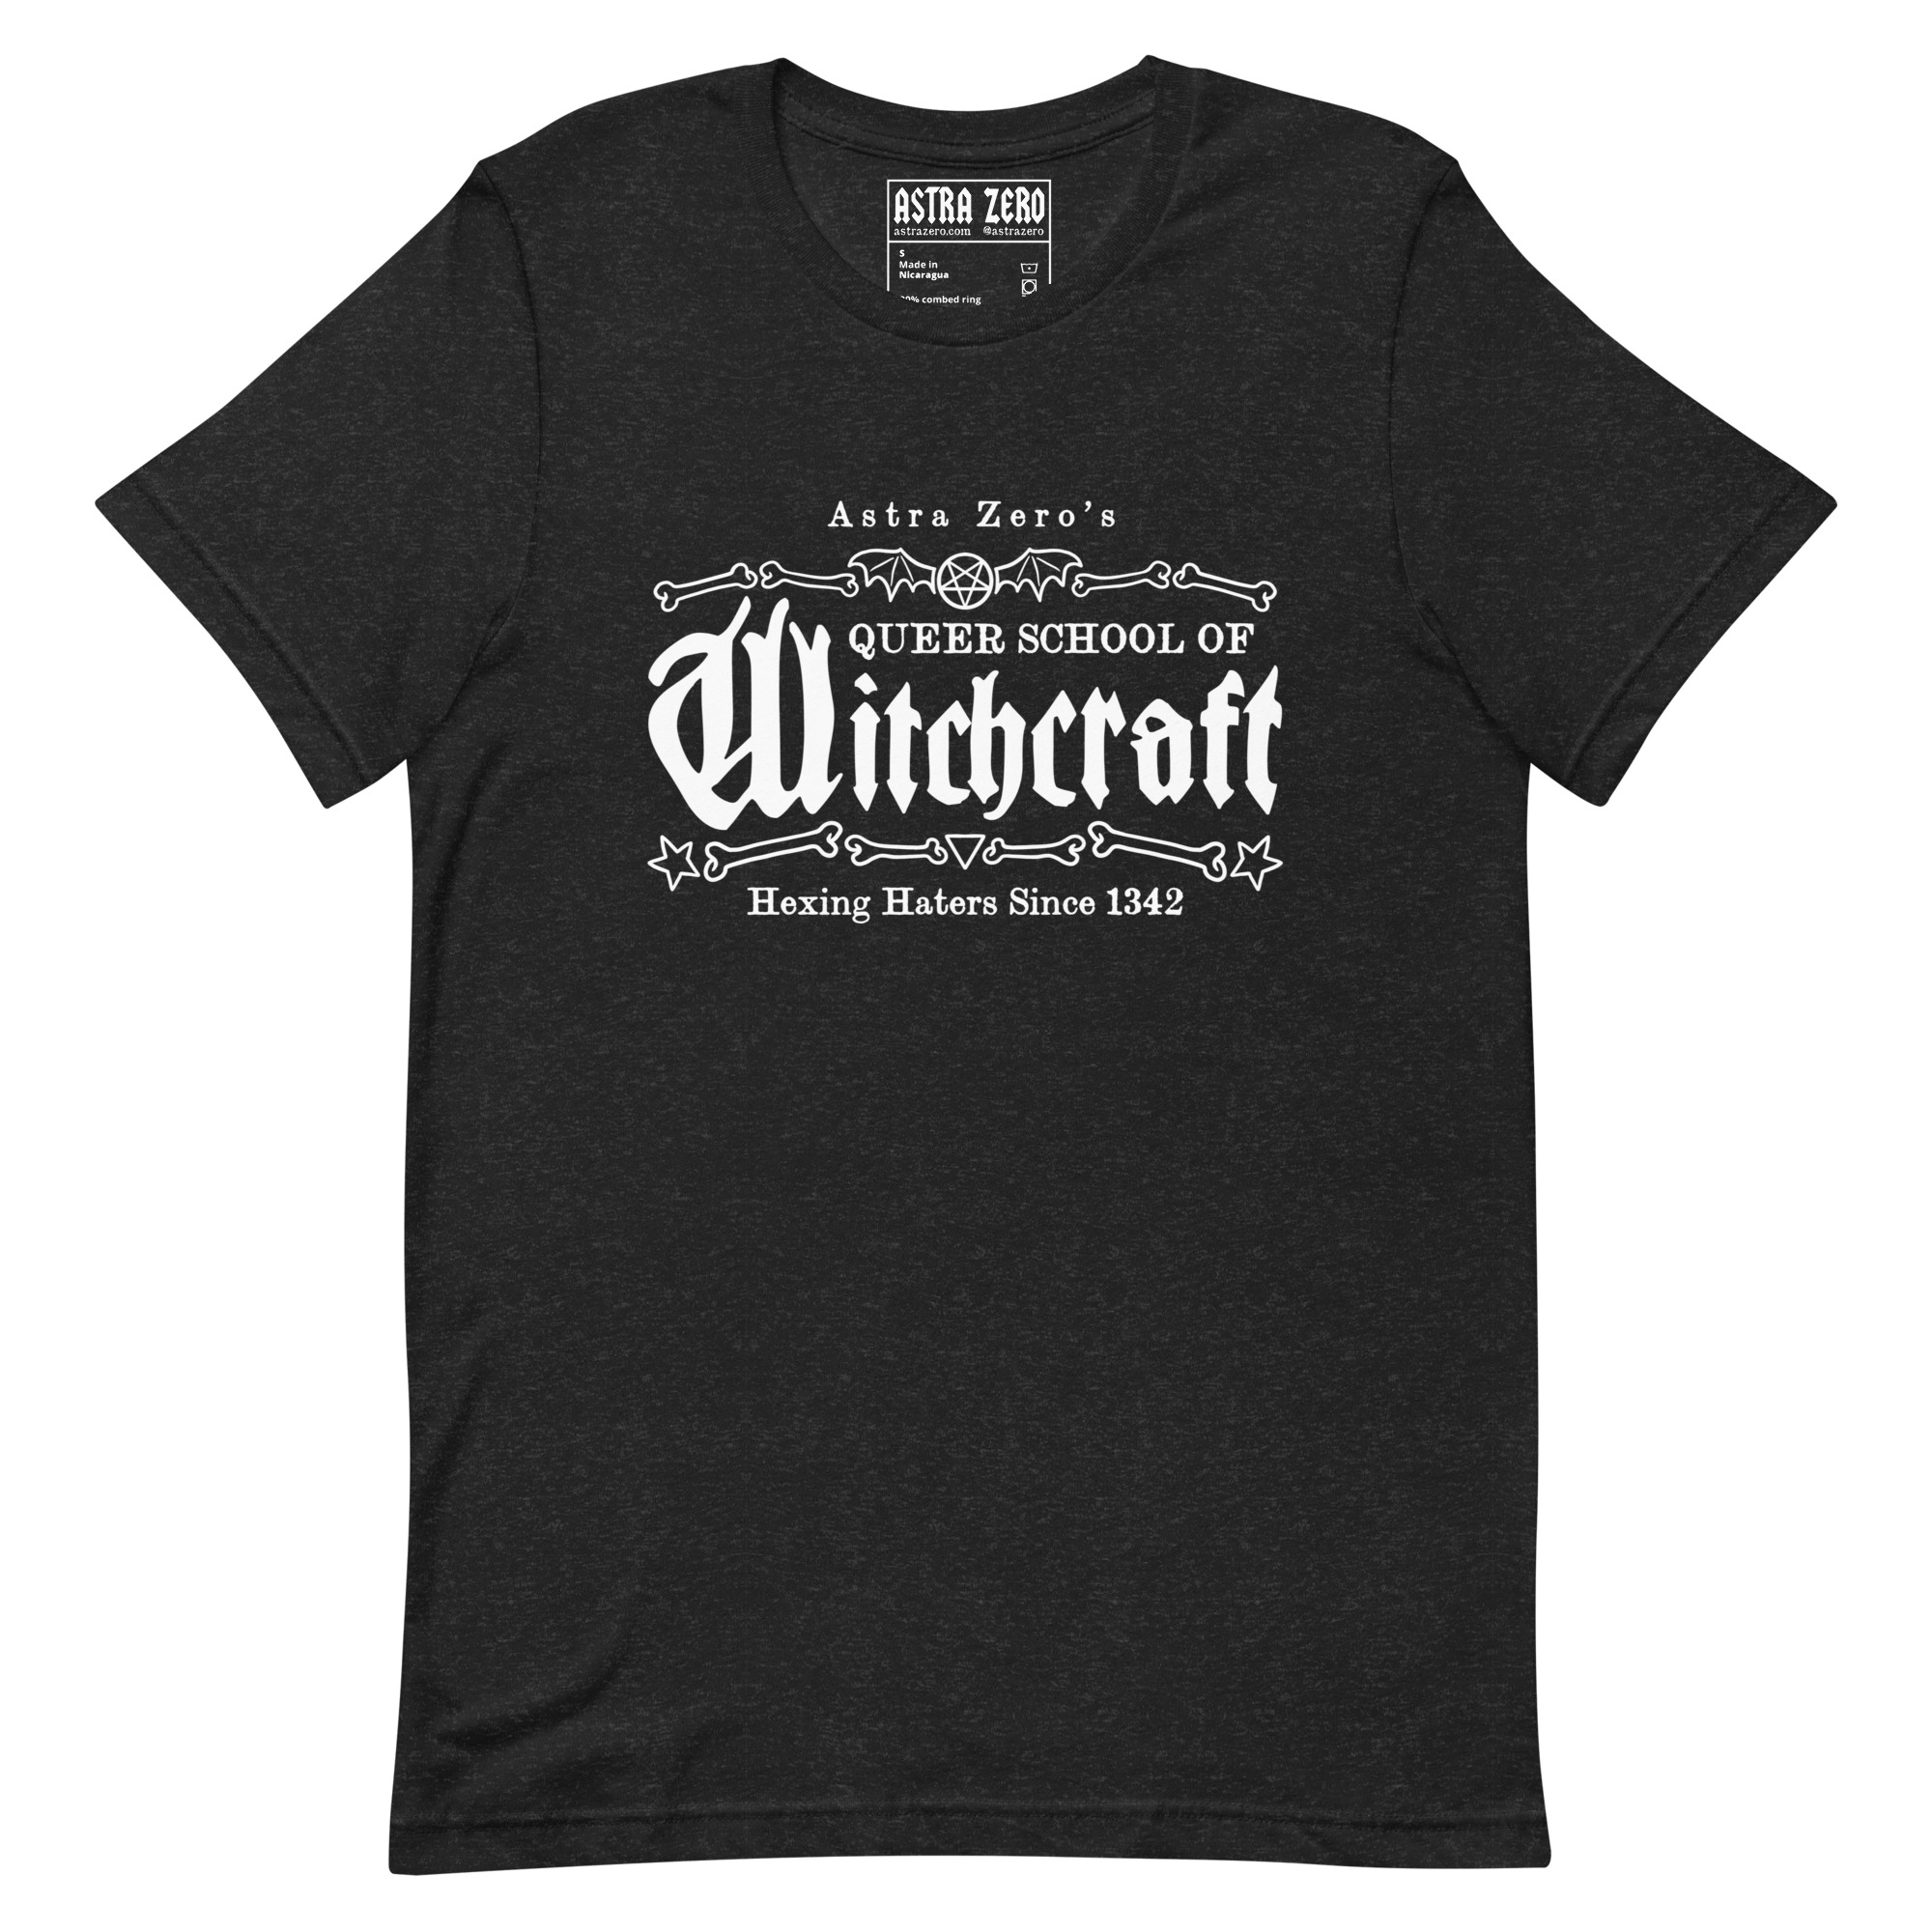 Featured image for “Queer School of Witchcraft - Unisex t-shirt”